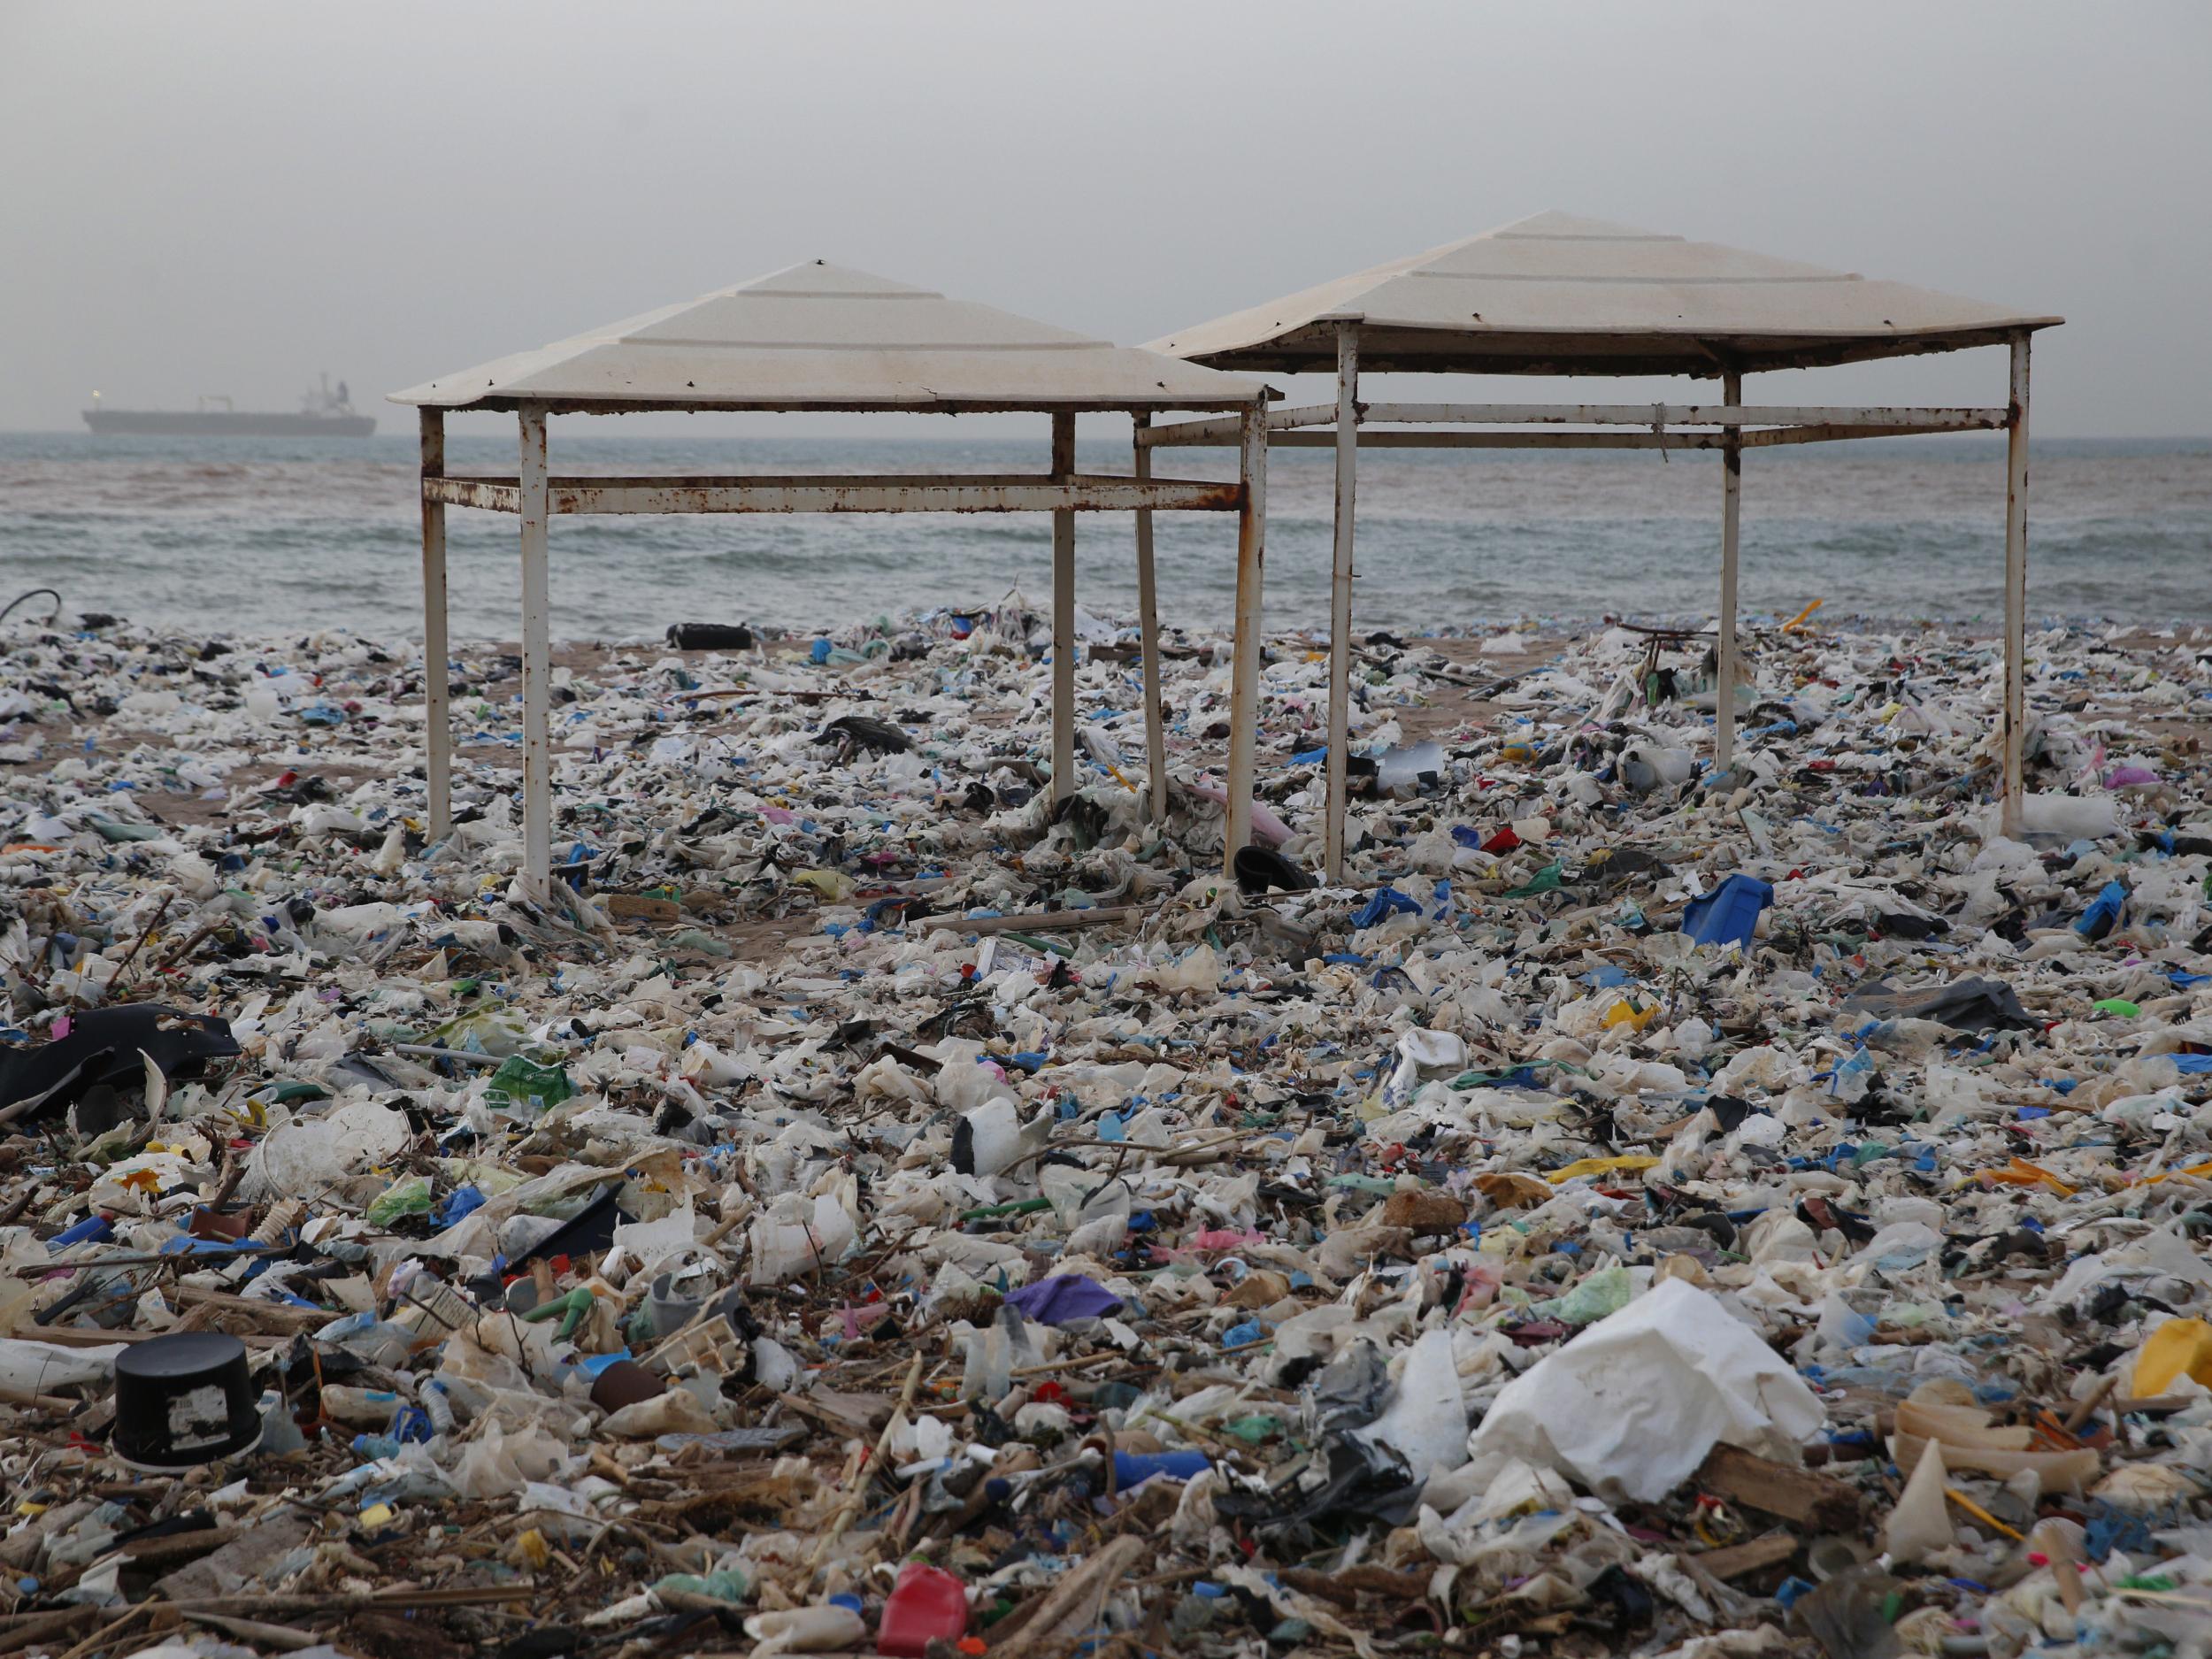 Piles of rubbish were dumped on a beach at Zouq Mosbeh, just north of Beirut, after a winter storm